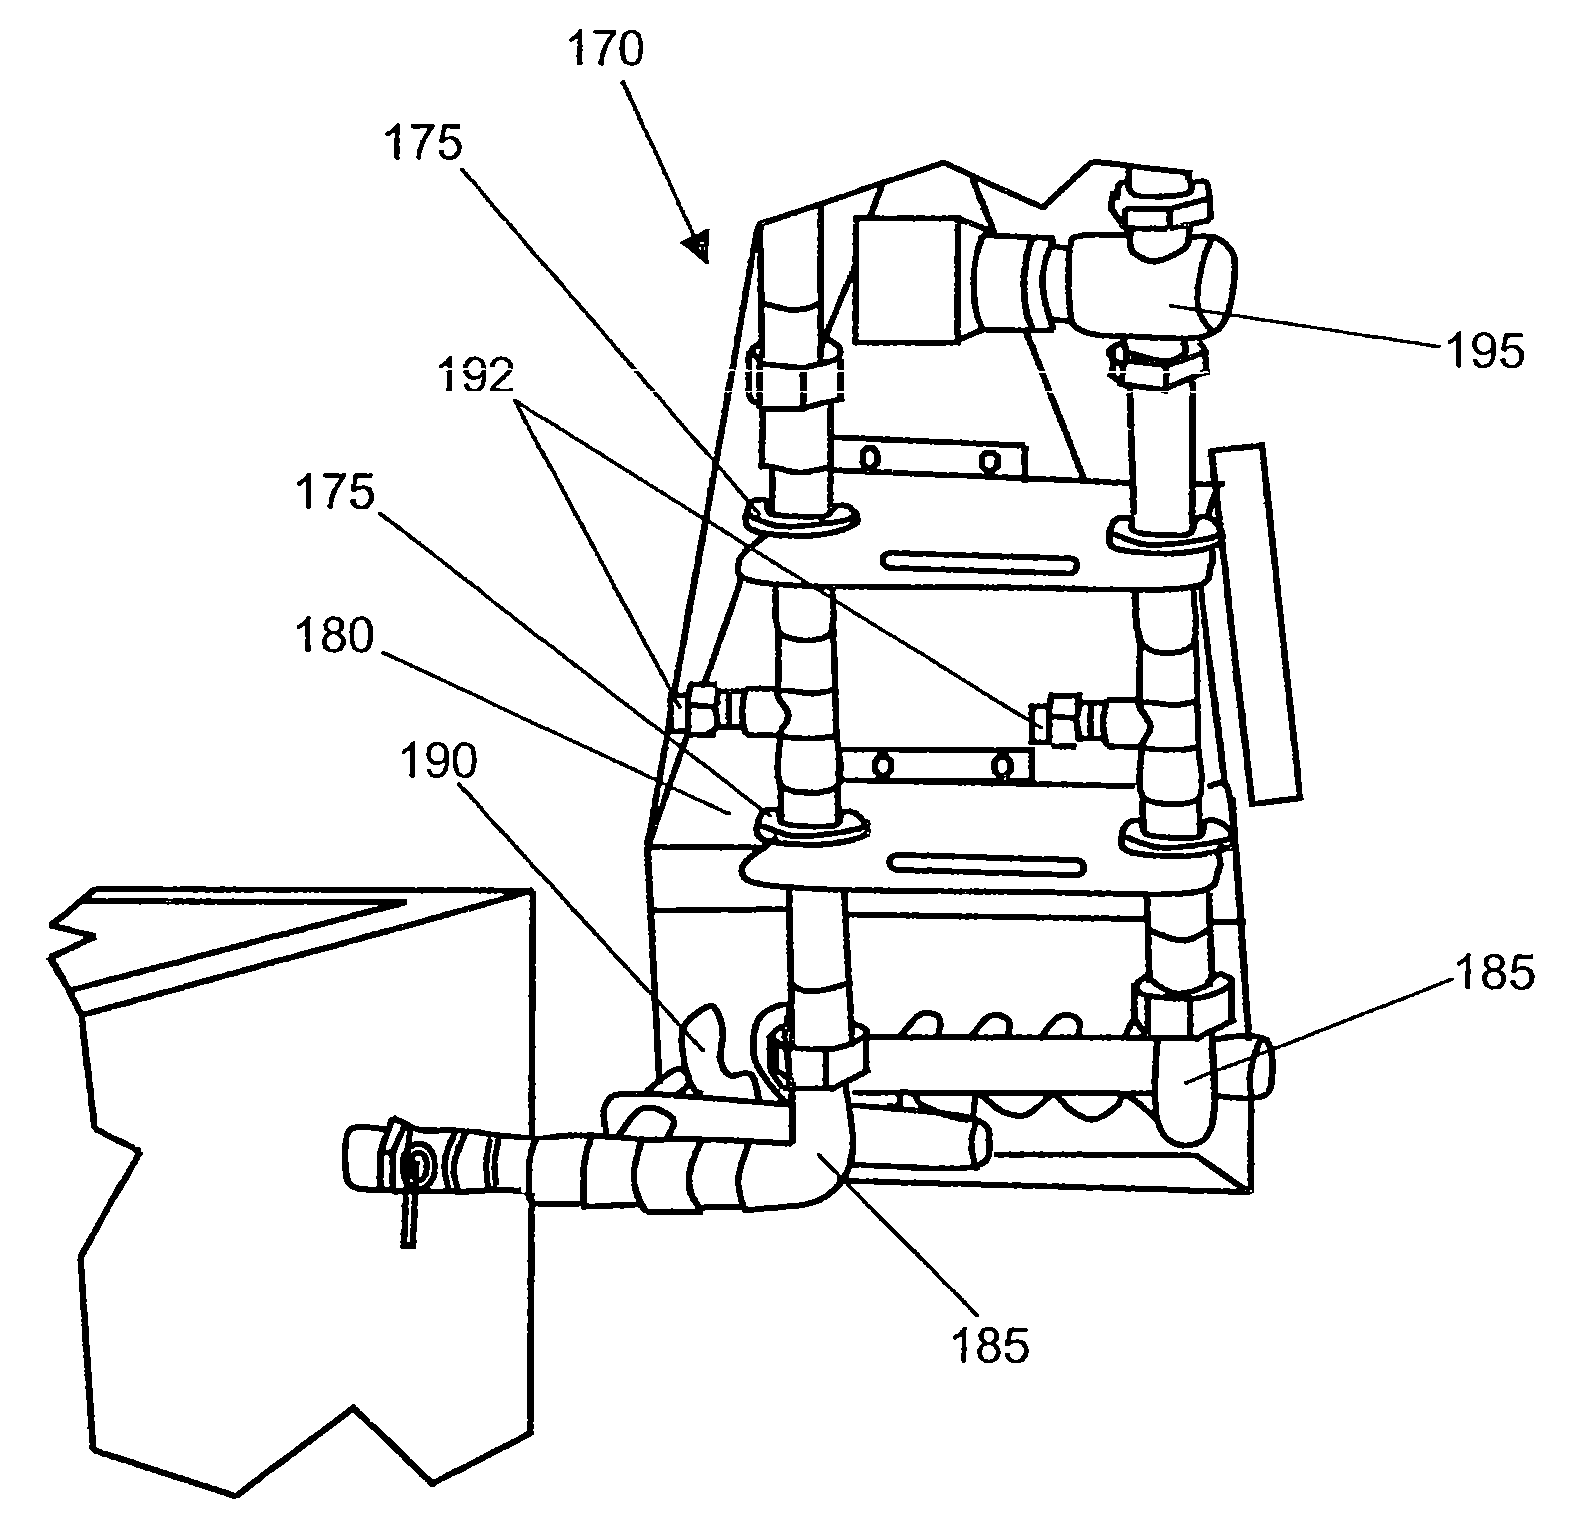 Method for transporting a piping structure